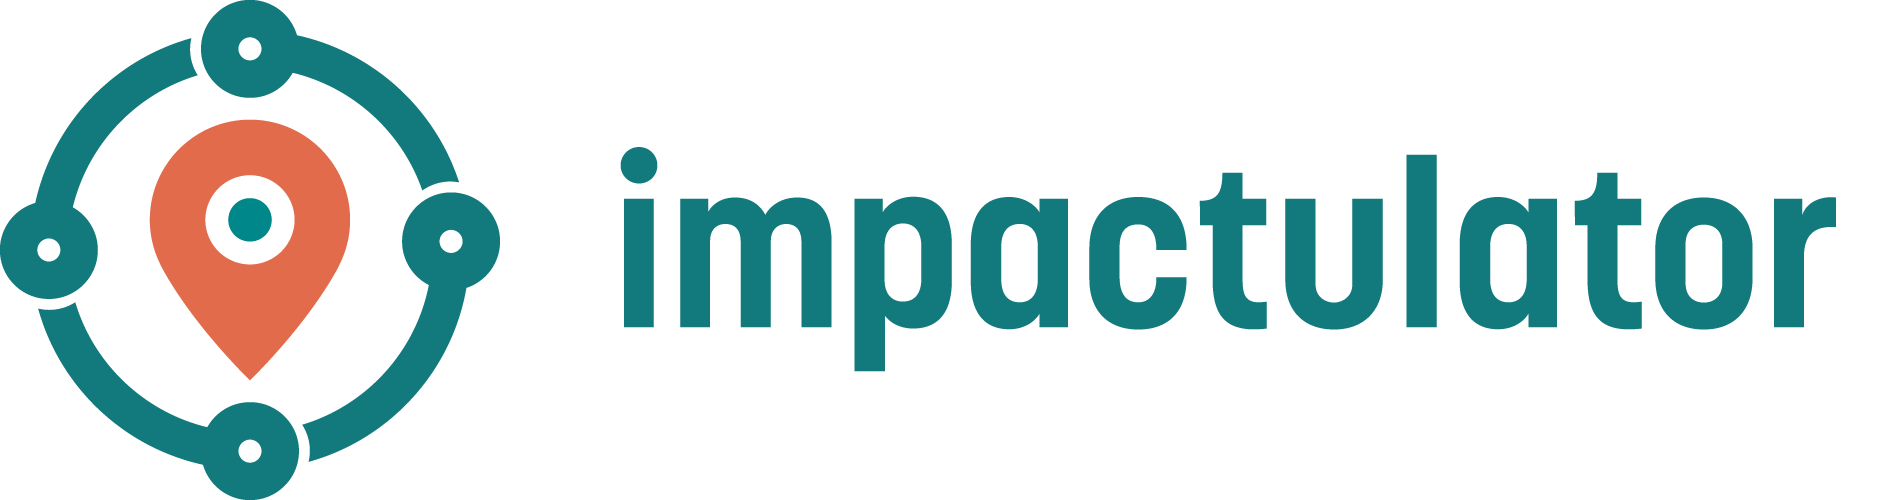 Impactulator logo featuring a map marker encircled by four arcs connecting cardinal points